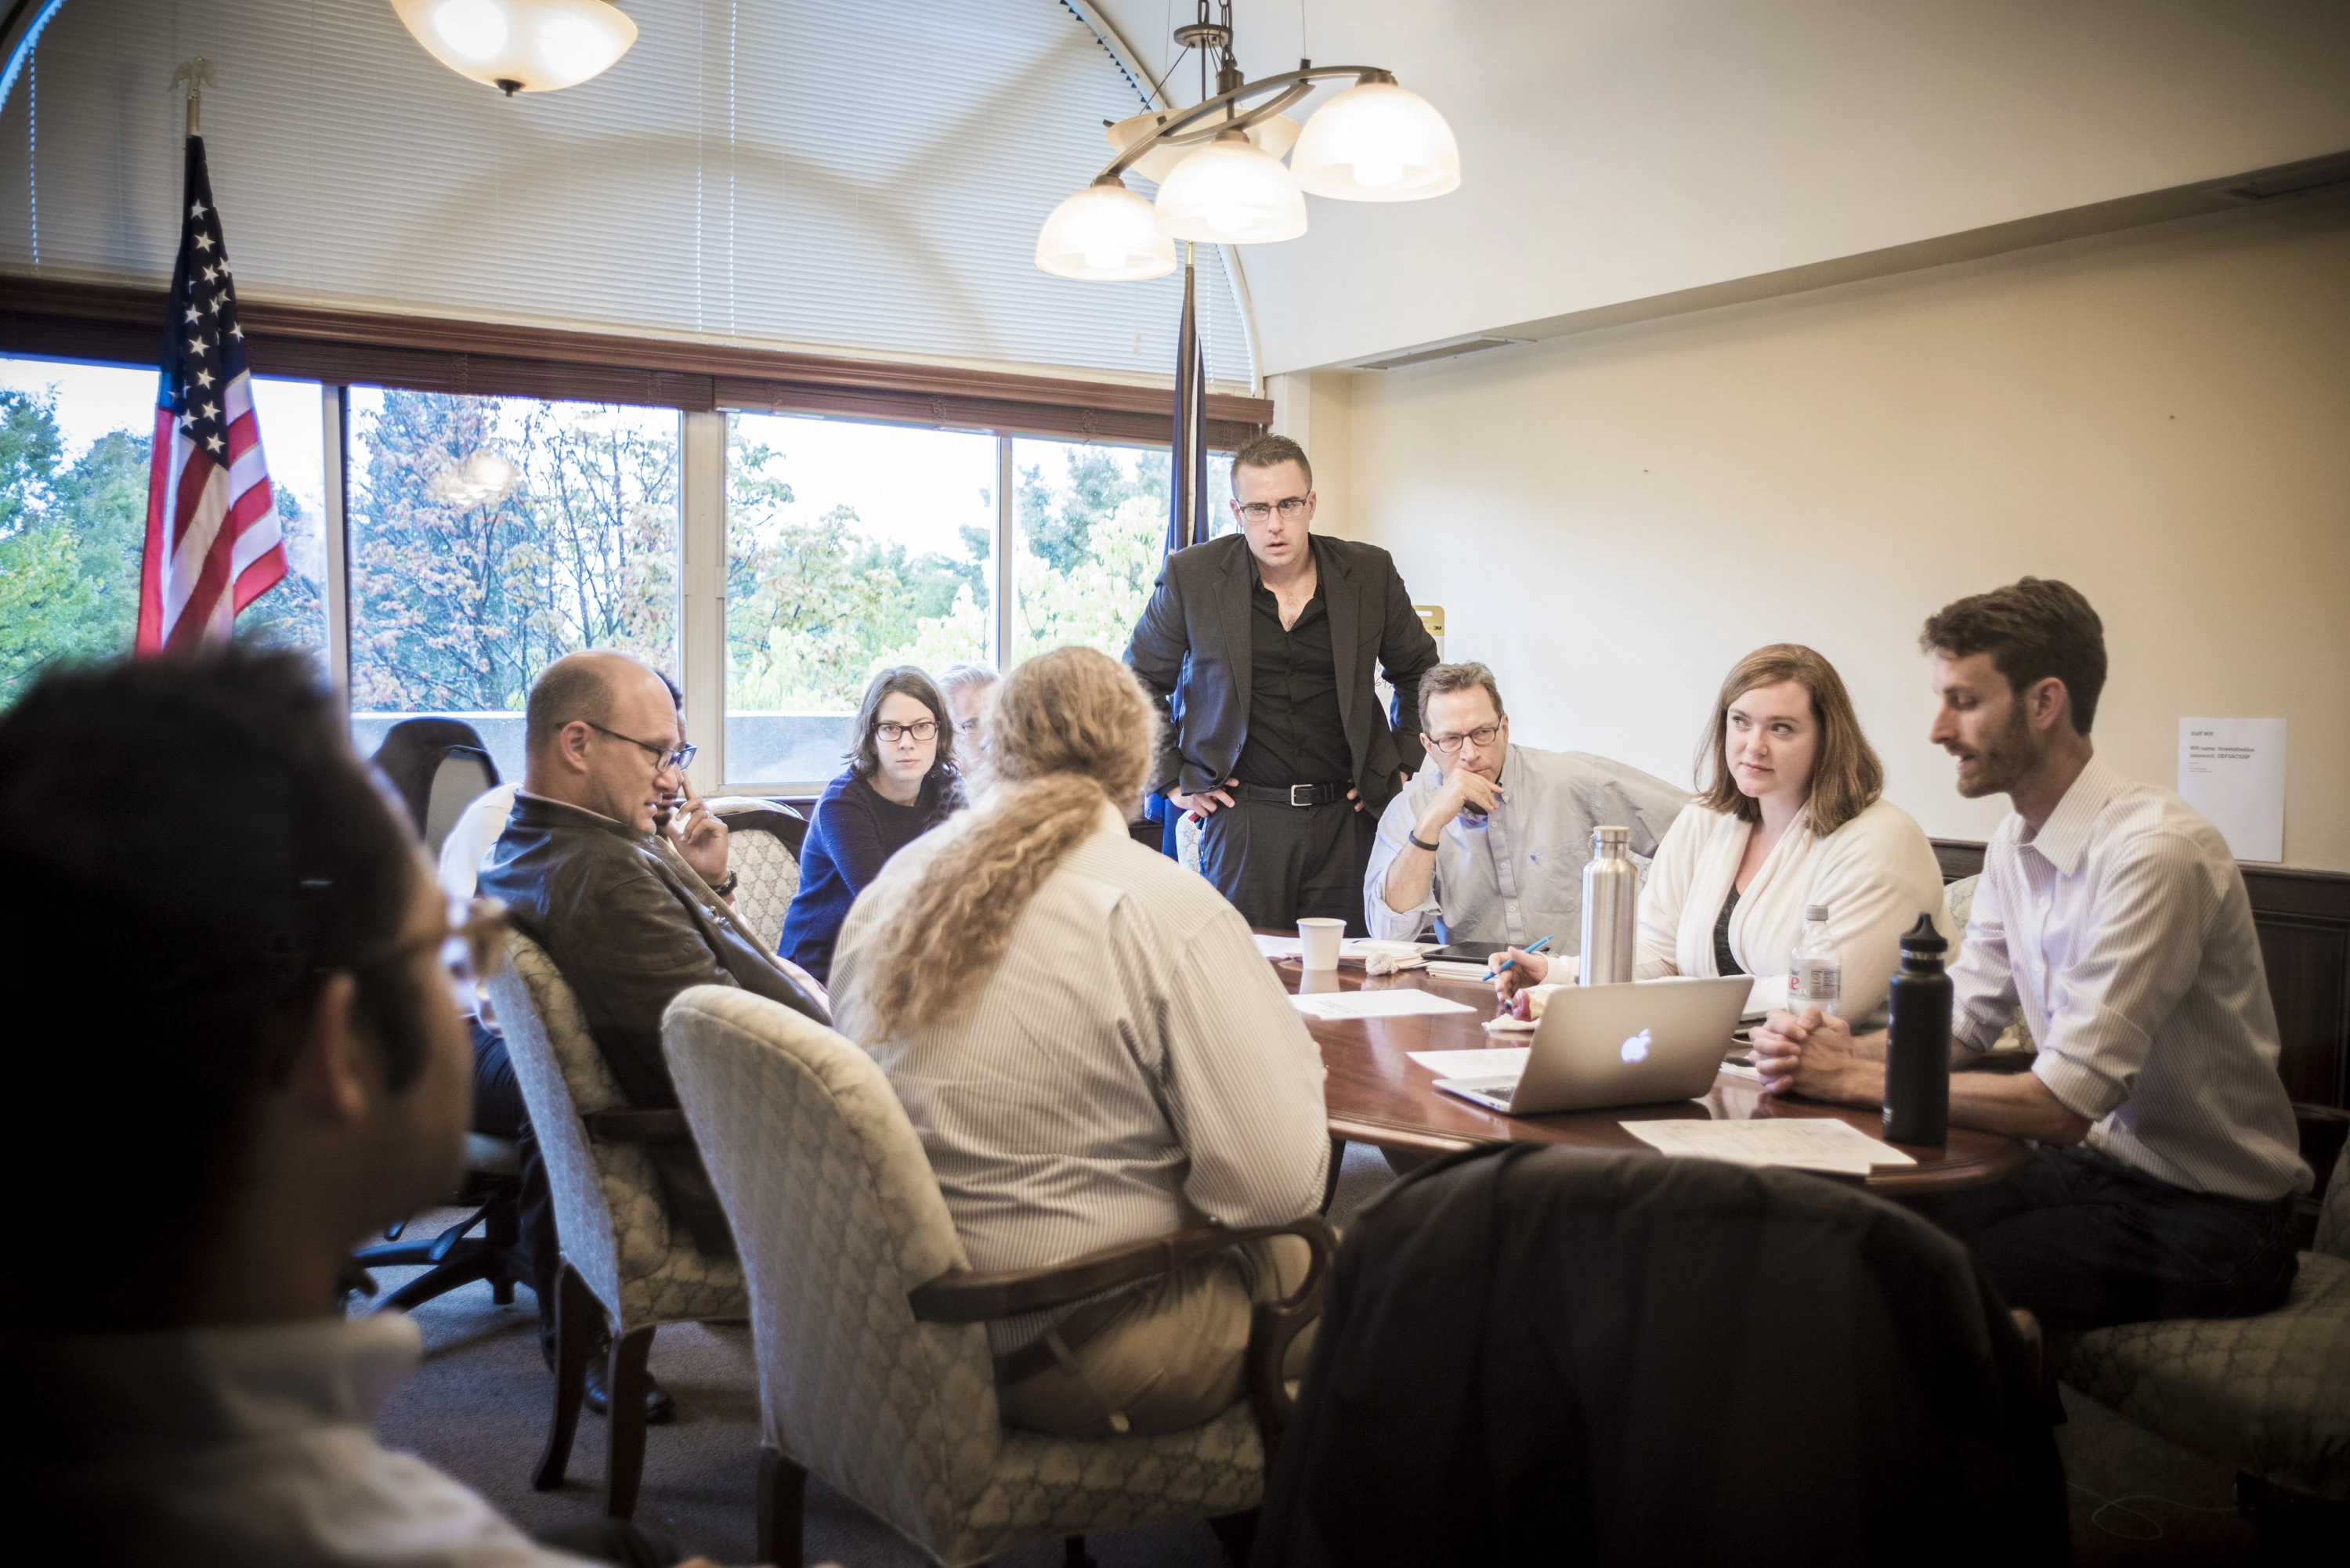 Top advisers to Sen. Bernie Sanders, a Democratic presidential hopeful, meet with members of his campaign staff from Iowa, New Hampshire and South Carolina in Burlington, Vt., Sept. 30, 2015. The Vermont senator and his advisers, having raised about $26 million since July, are forming a battle plan beyond their immediate goals of winning Iowa and New Hampshire. (Ian Thomas Jansen-Lonnquist/The New York Times)